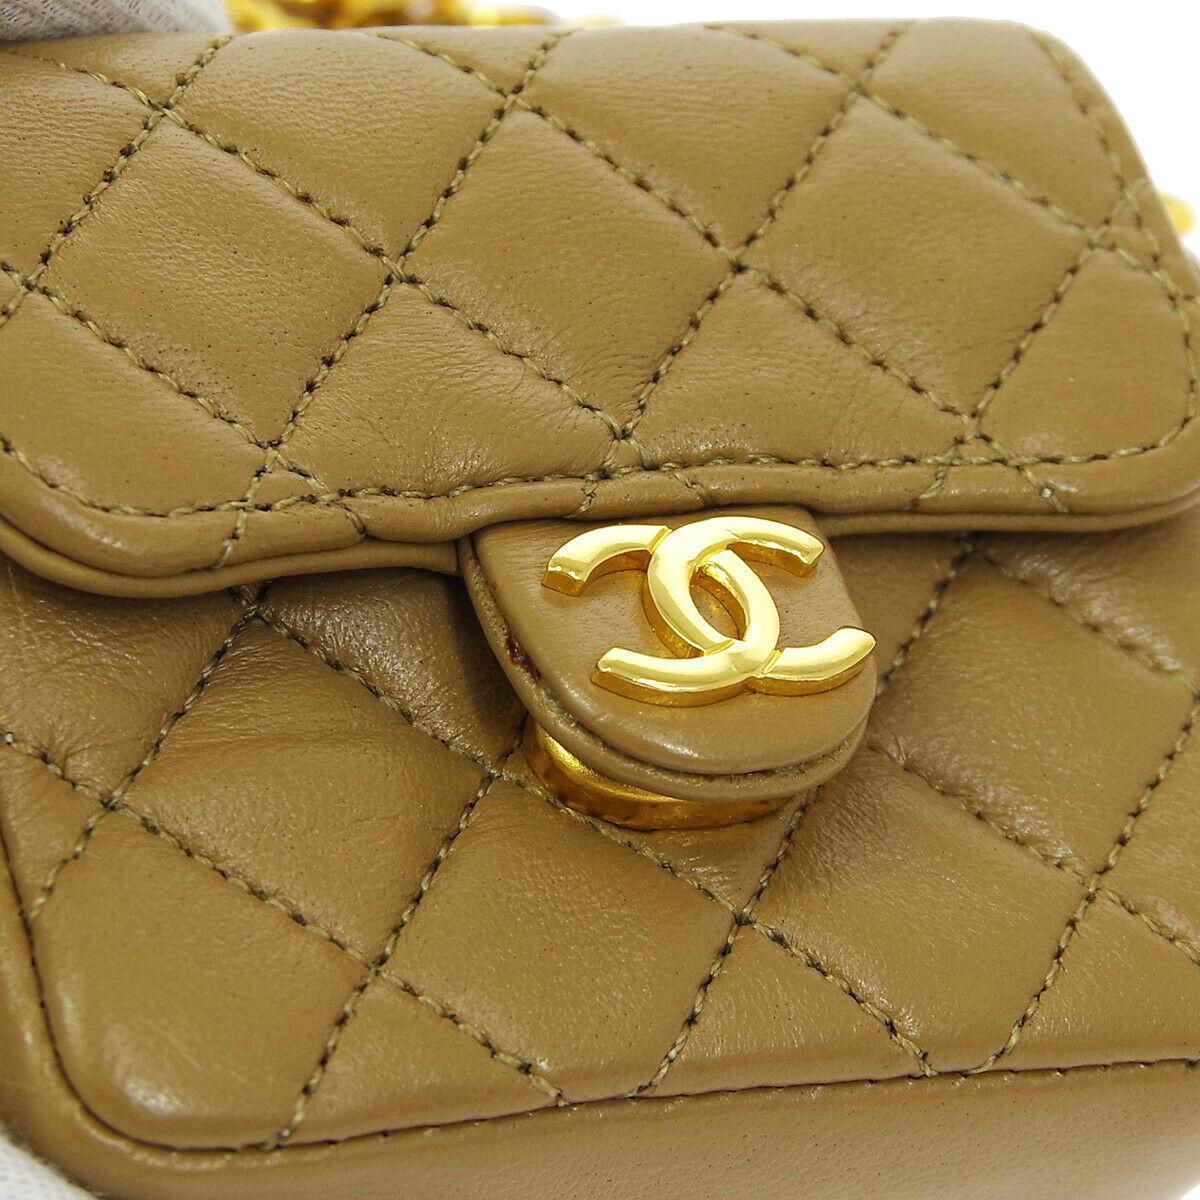 Chanel Nude Tan Leather Gold Micro Mini Shoulder Flap Bag in Box

Leather
Gold tone hardware
Leather lining
Date code present
Made in France
Shoulder strap drop 19